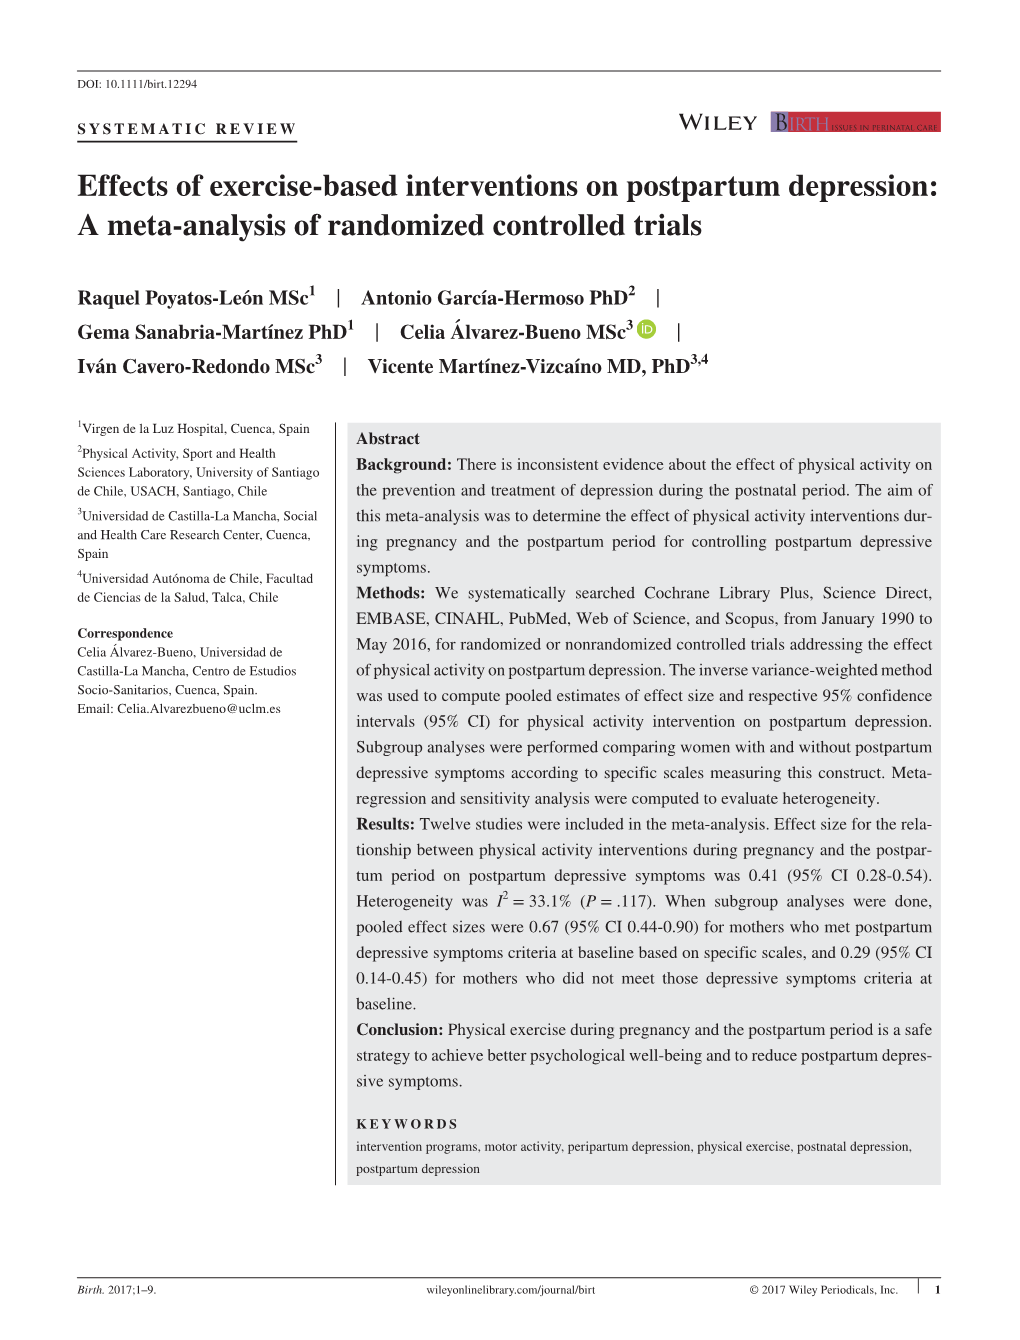 Based Interventions on Postpartum Depression: a Meta-­Analysis of Randomized Controlled Trials